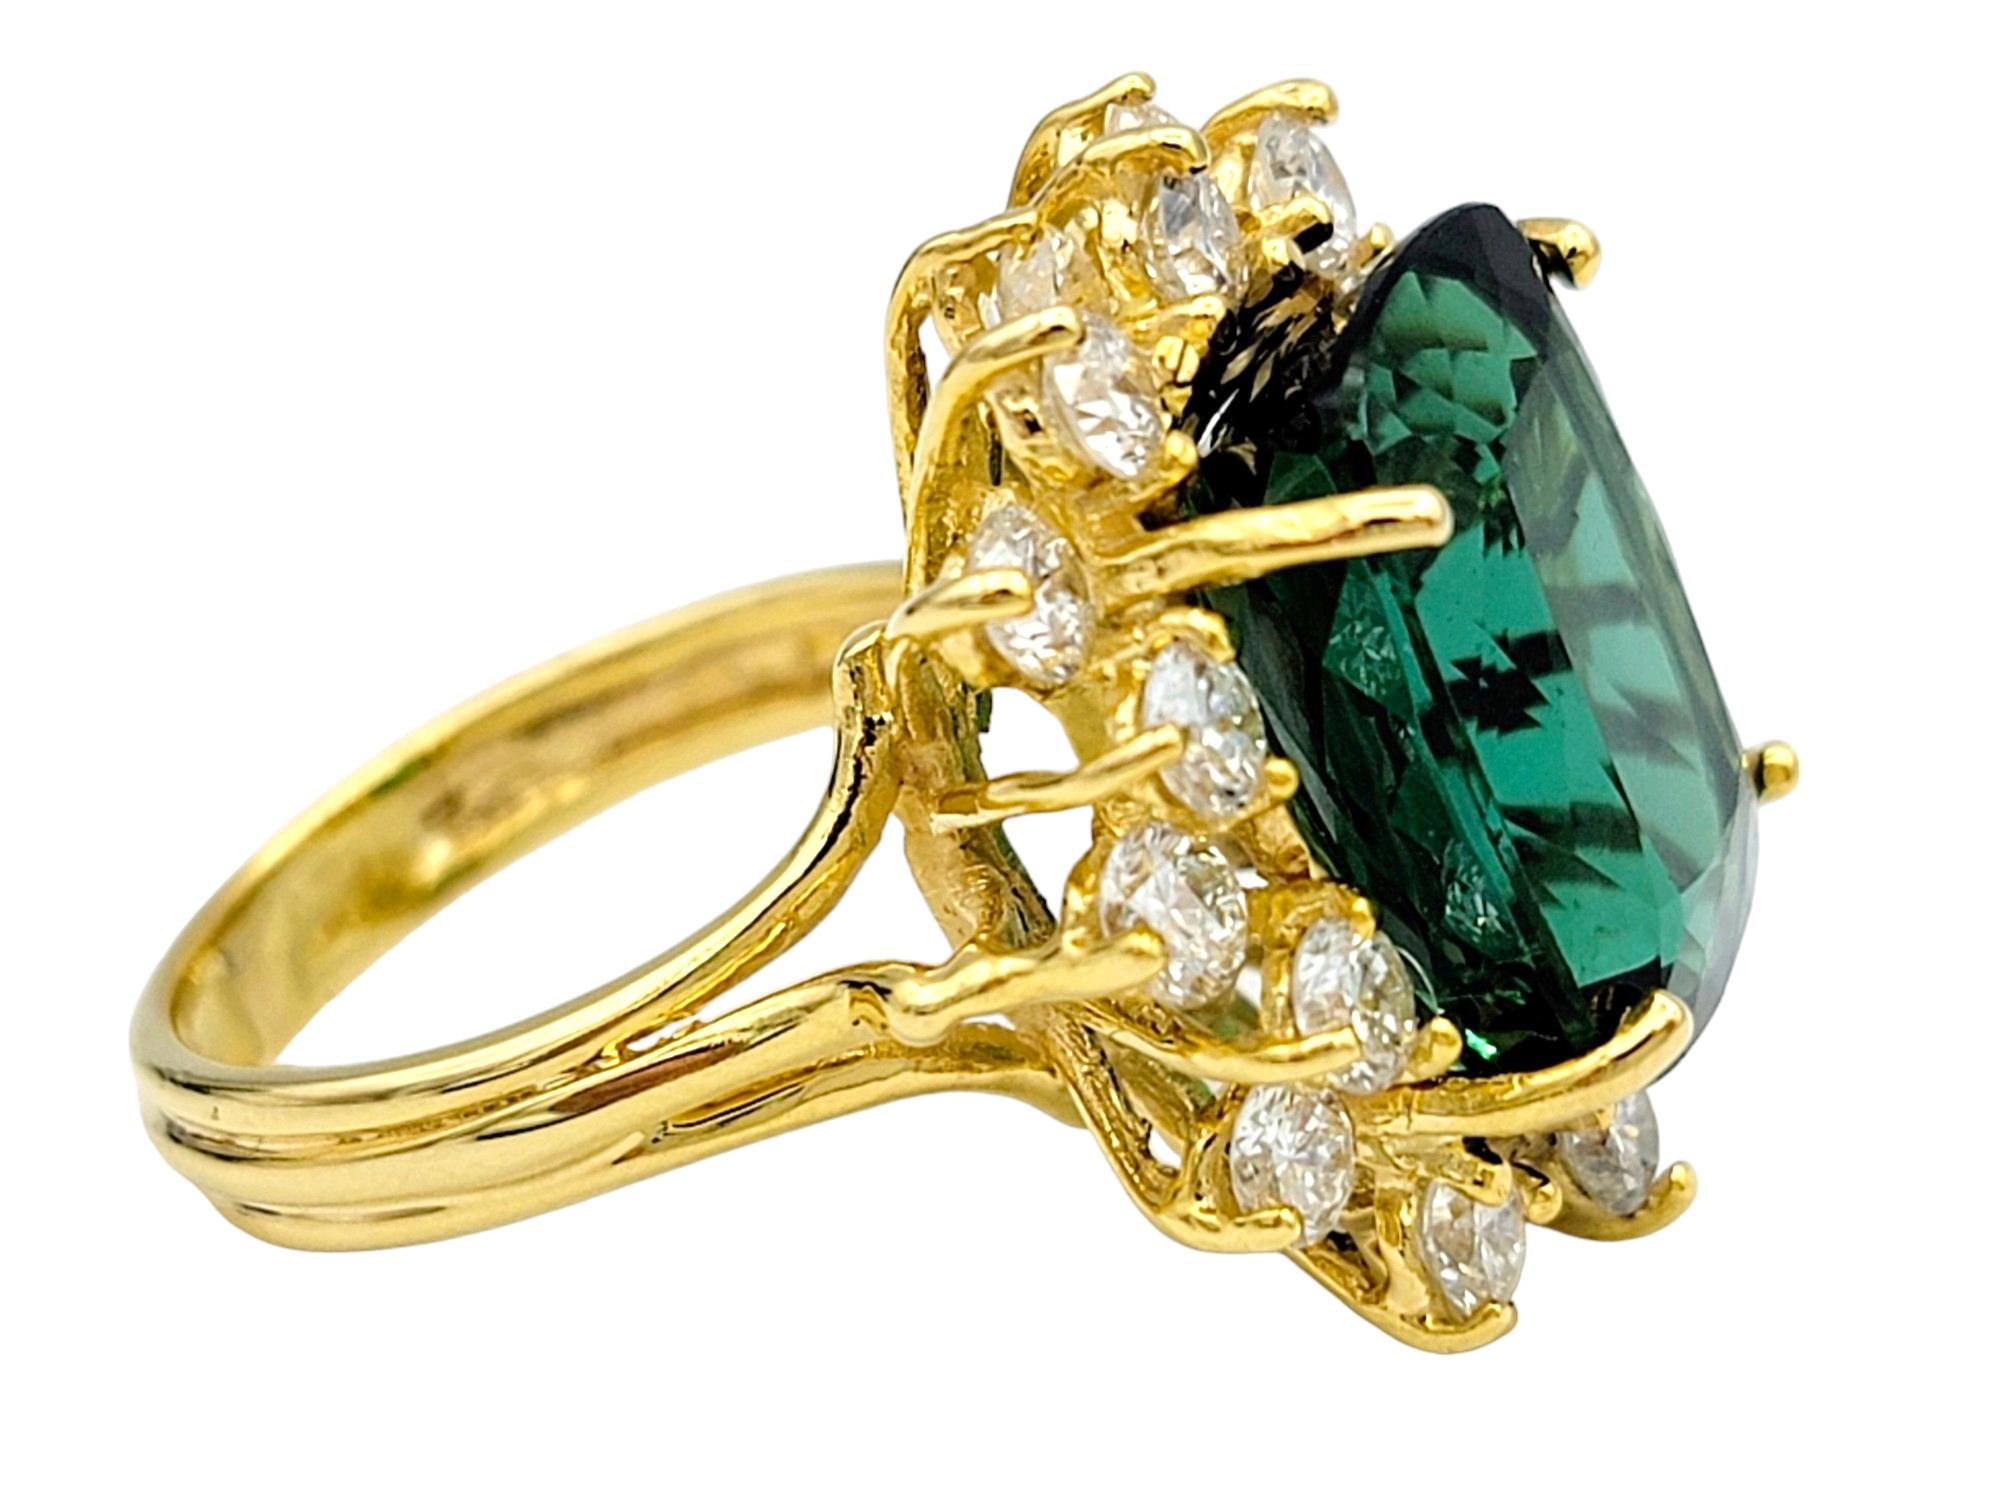 Large Cushion Cut Green Tourmaline and Diamond Halo Ring in 14 Karat Yellow Gold In Good Condition For Sale In Scottsdale, AZ